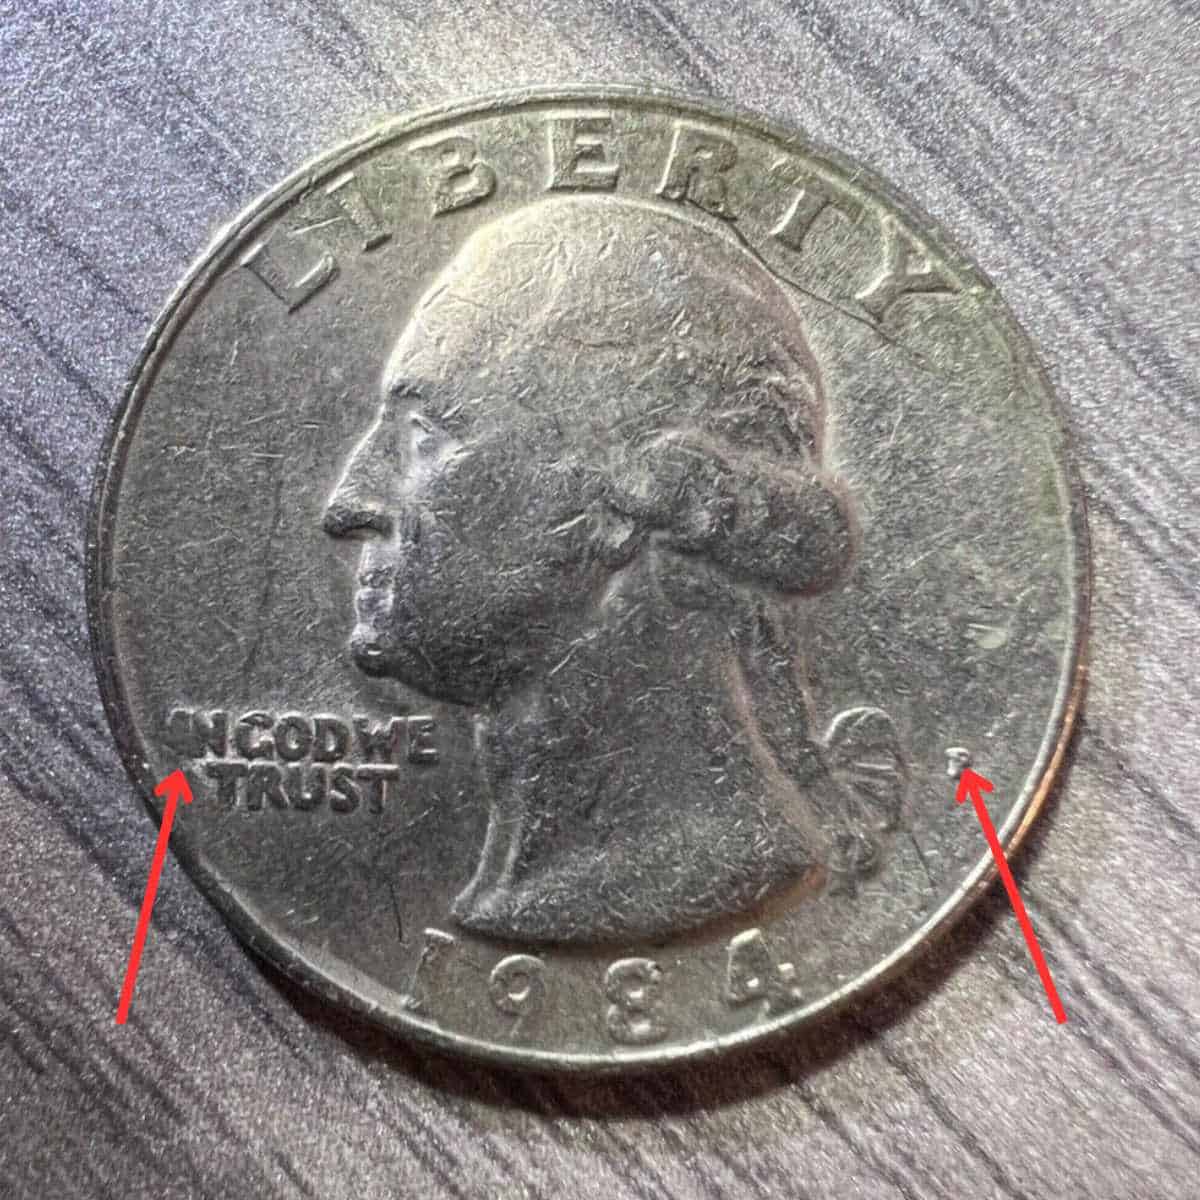 1984-P Quarter with Strike Though Erough and a misplaced Mint Mark error coin value